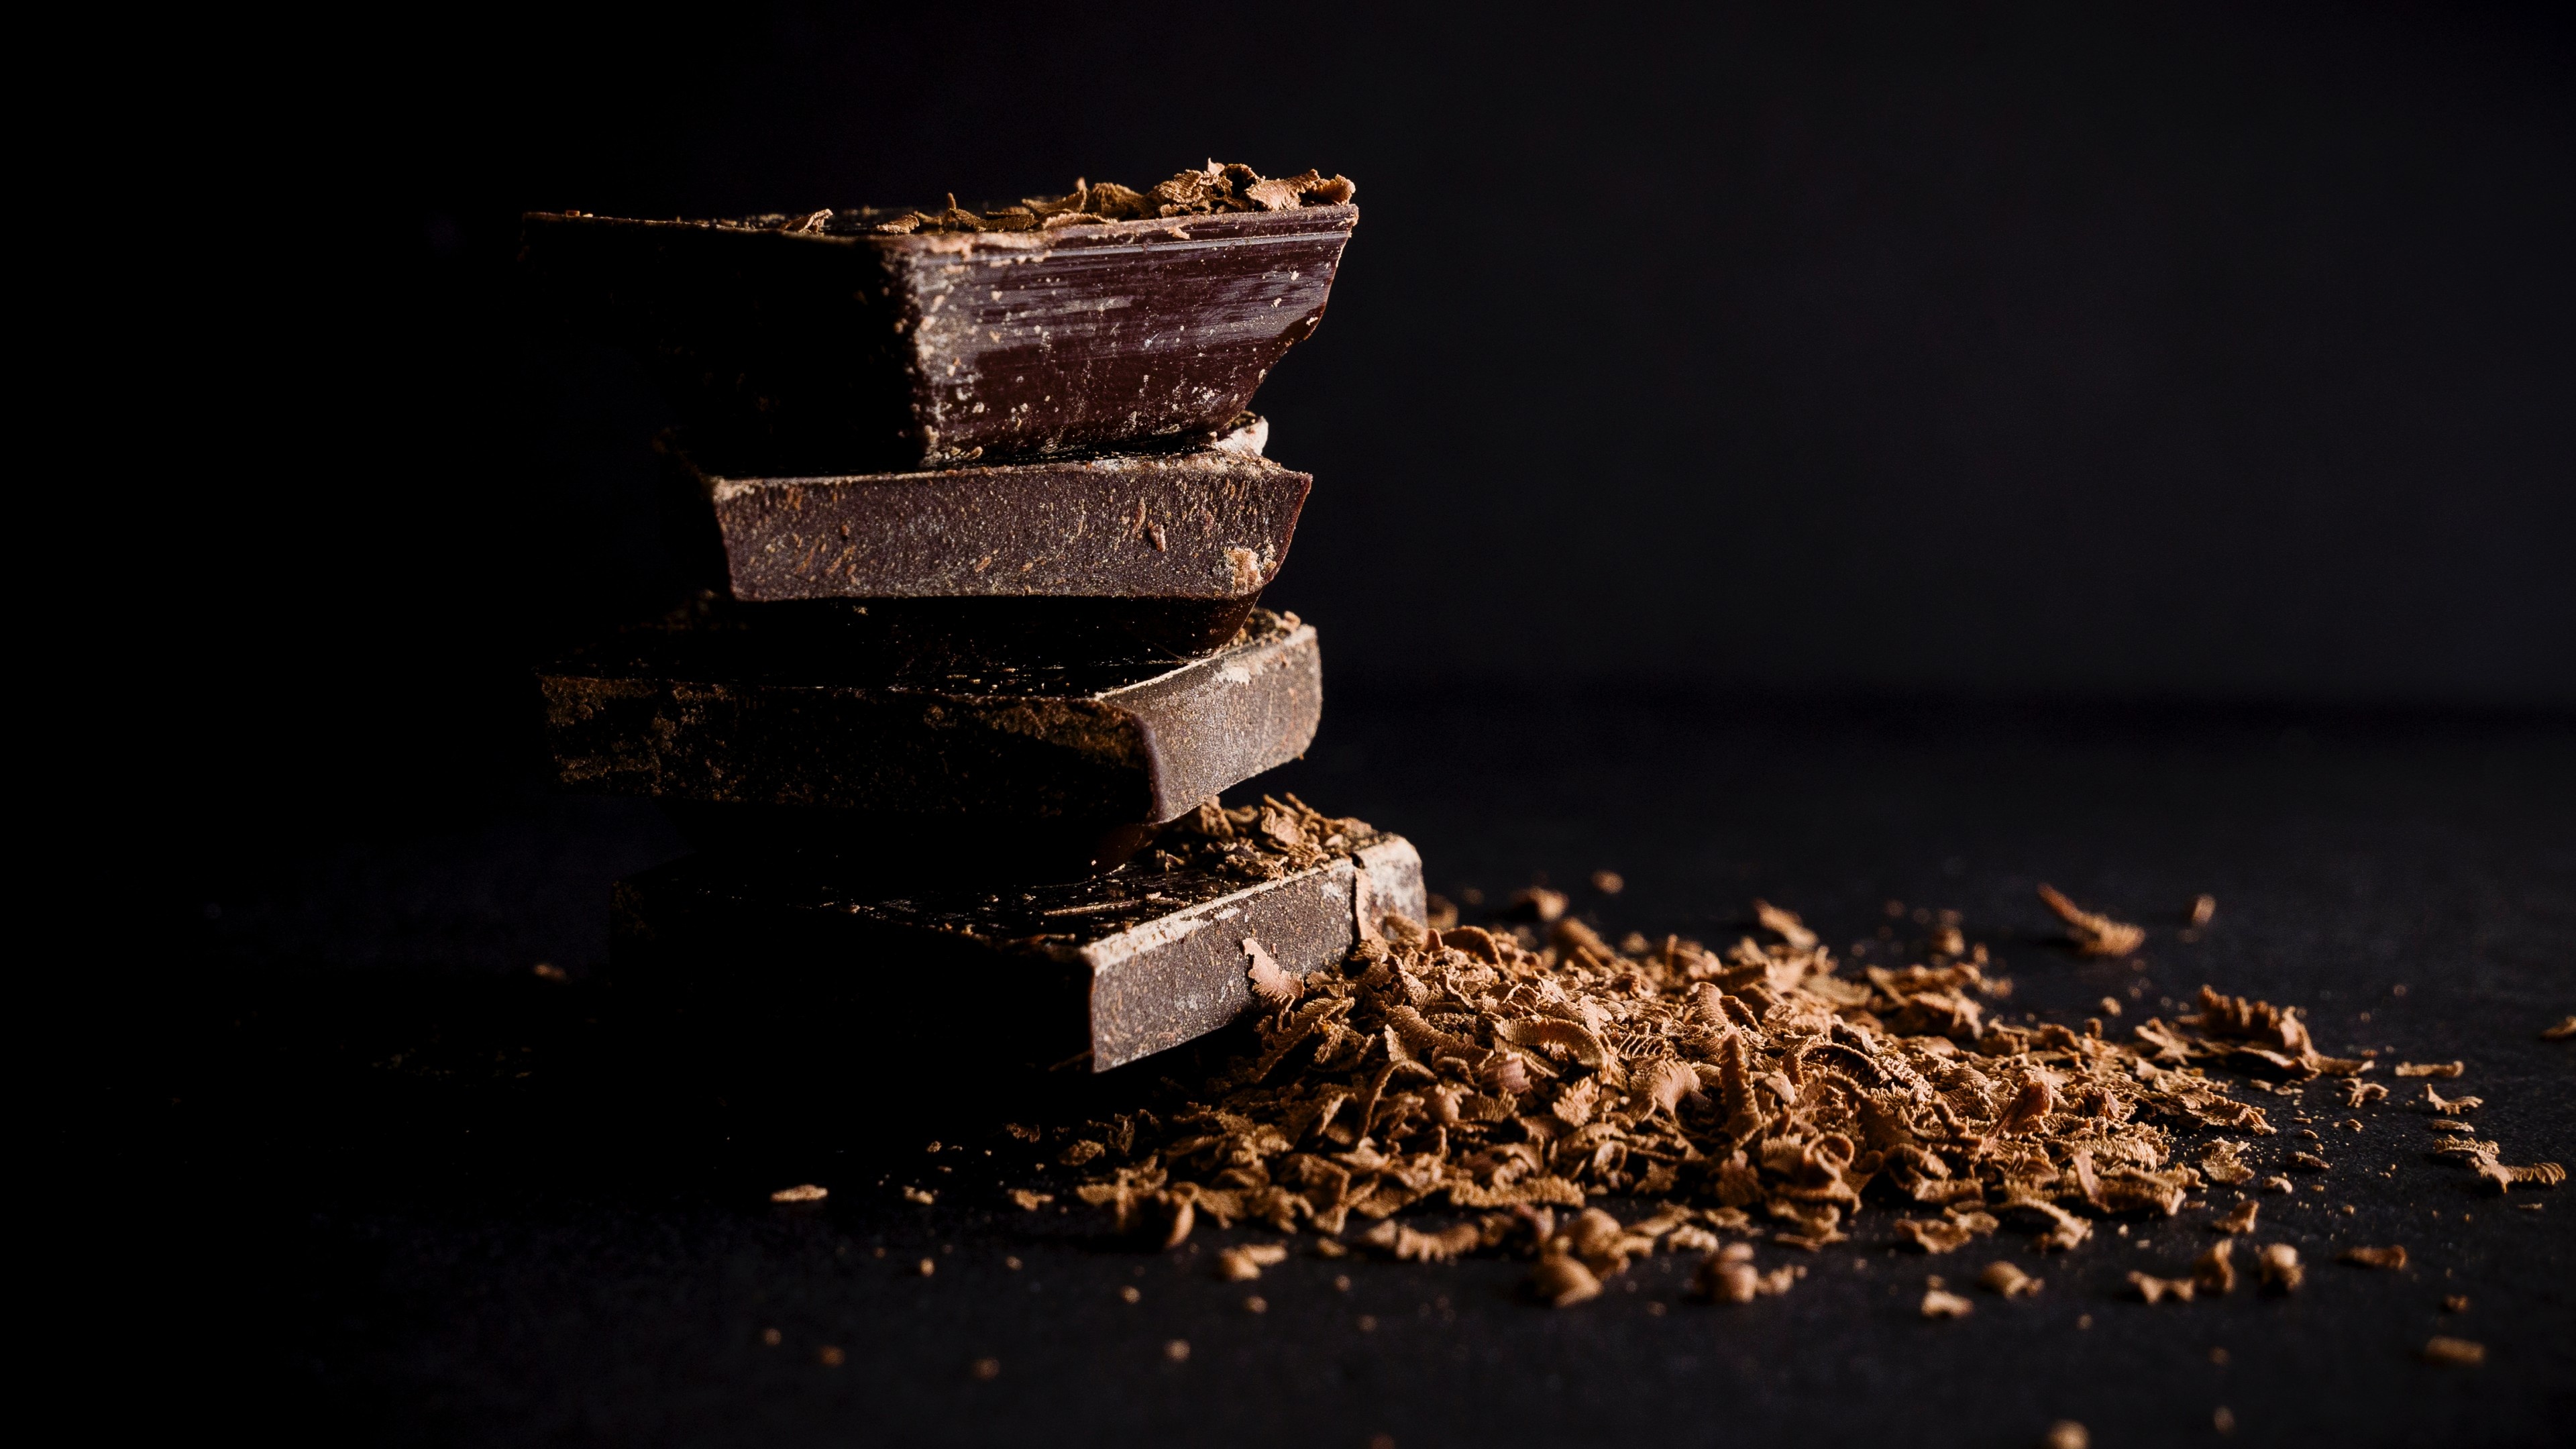 Chocolate: Used in many desserts like pudding, cakes, candy, ice cream. 3840x2160 4K Background.